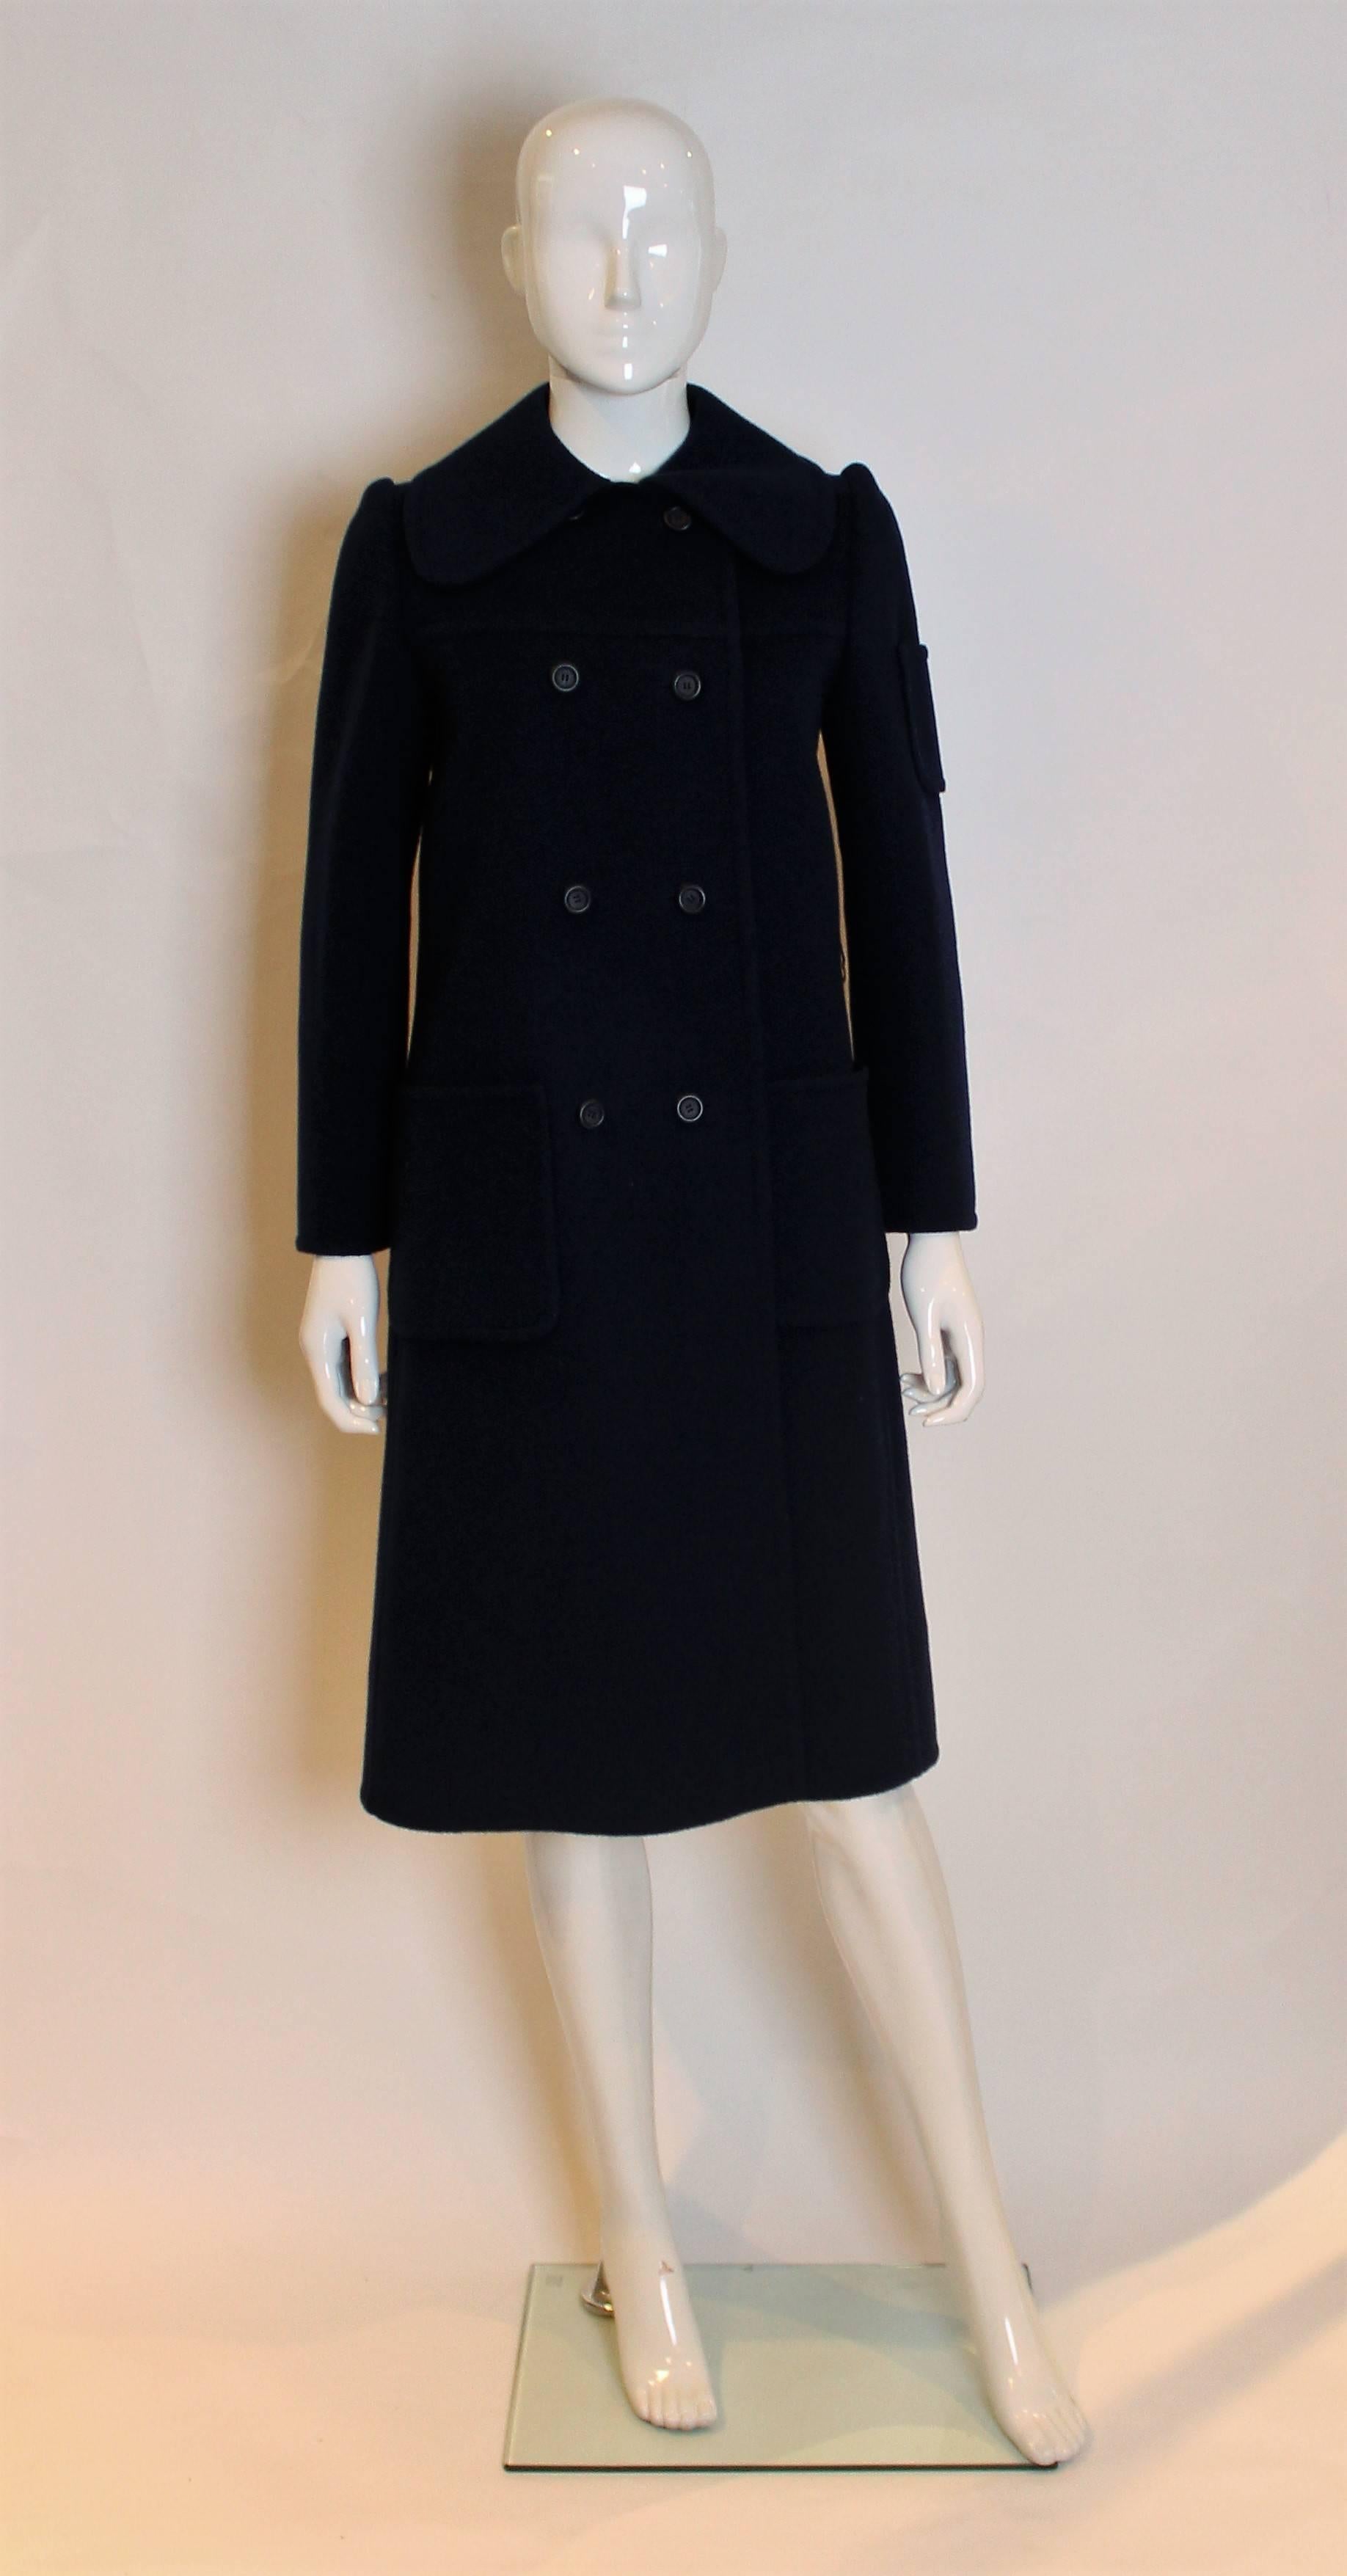 A chic coat by Christian Dior, Patron Original number 002000. In a dark blue wool, this coat is unlined and has a round collar , two rows of four buttons and two pockets.-